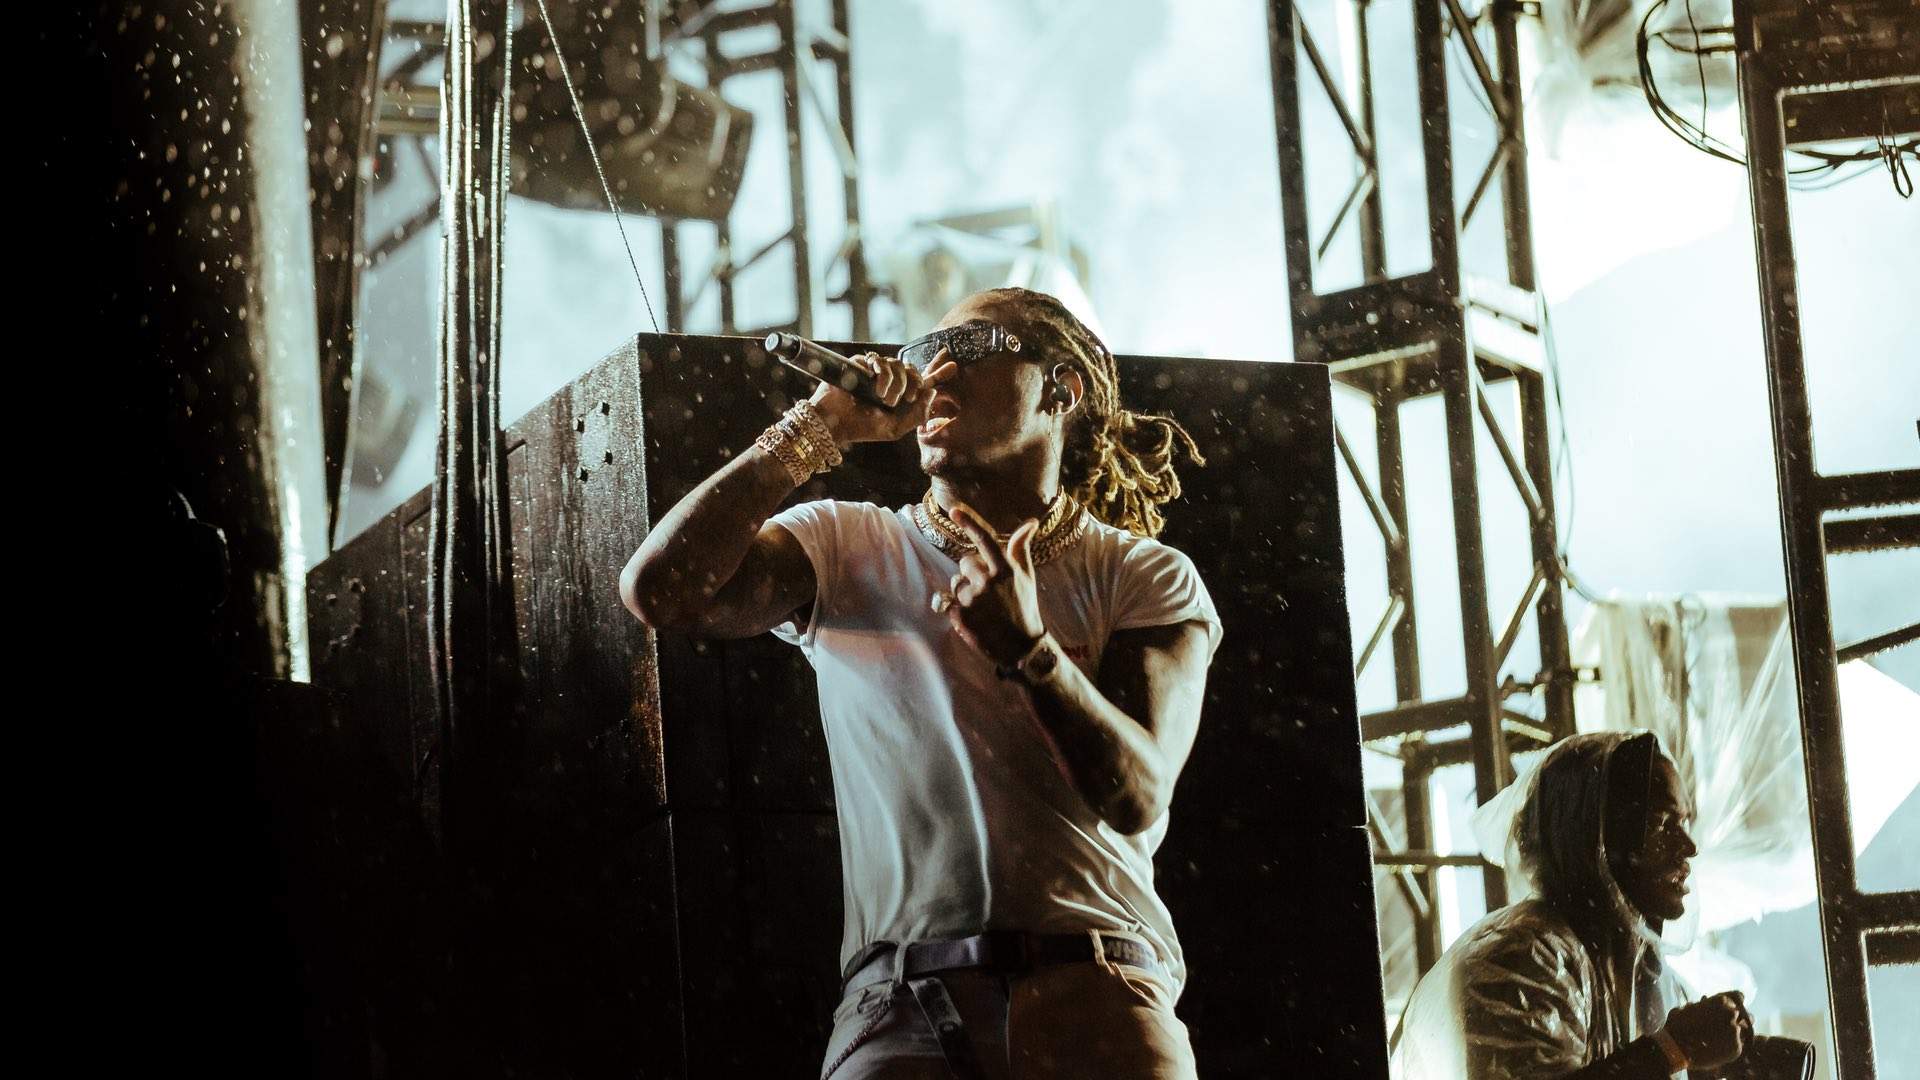 Future To Headline Huge Hip Hop Festival Rolling Loud's First Ever